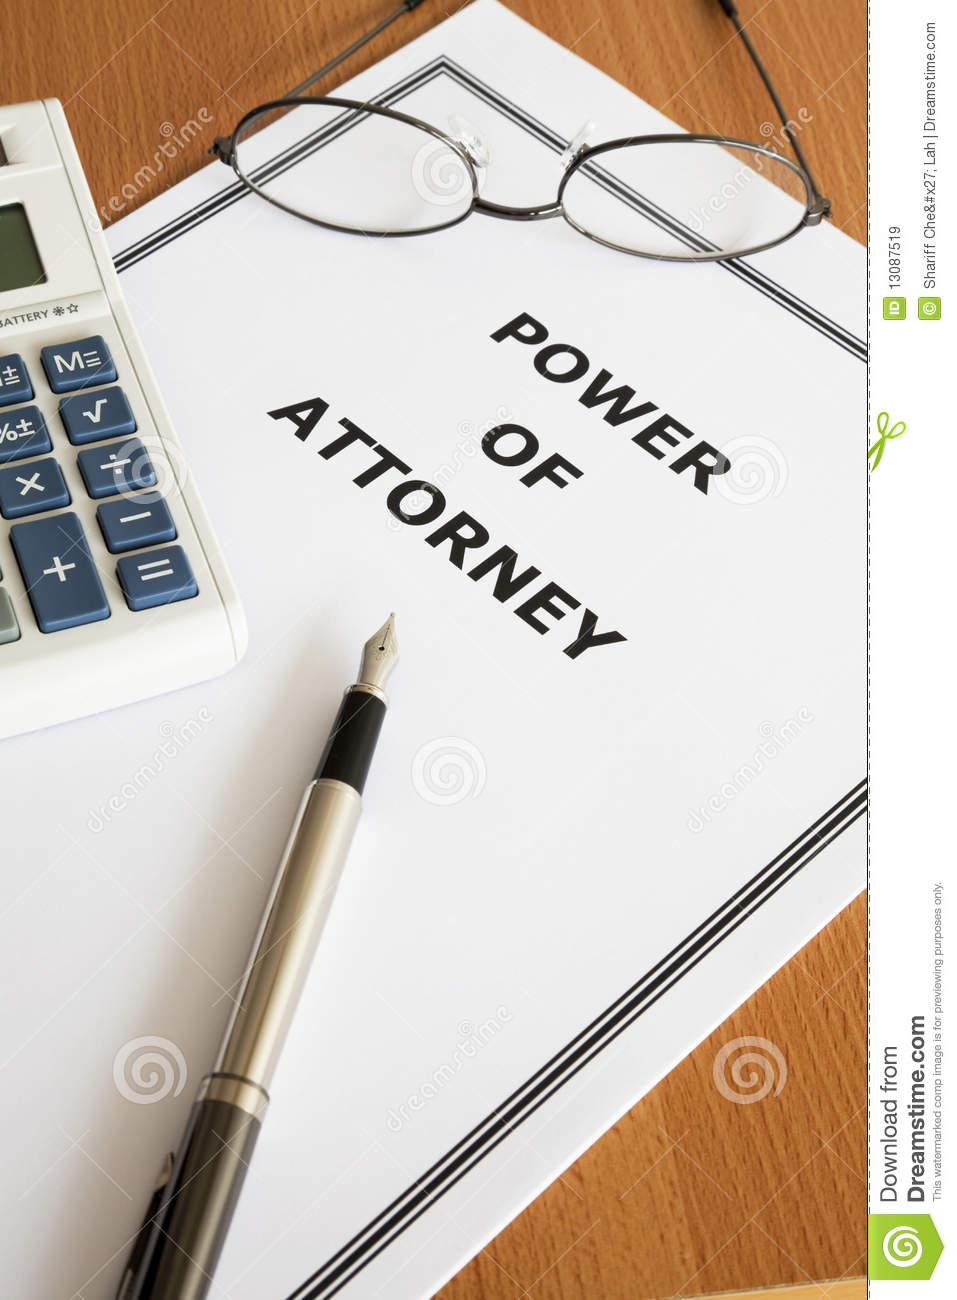 Power Of Attorney Royalty Free Stock Images   Image  13087519